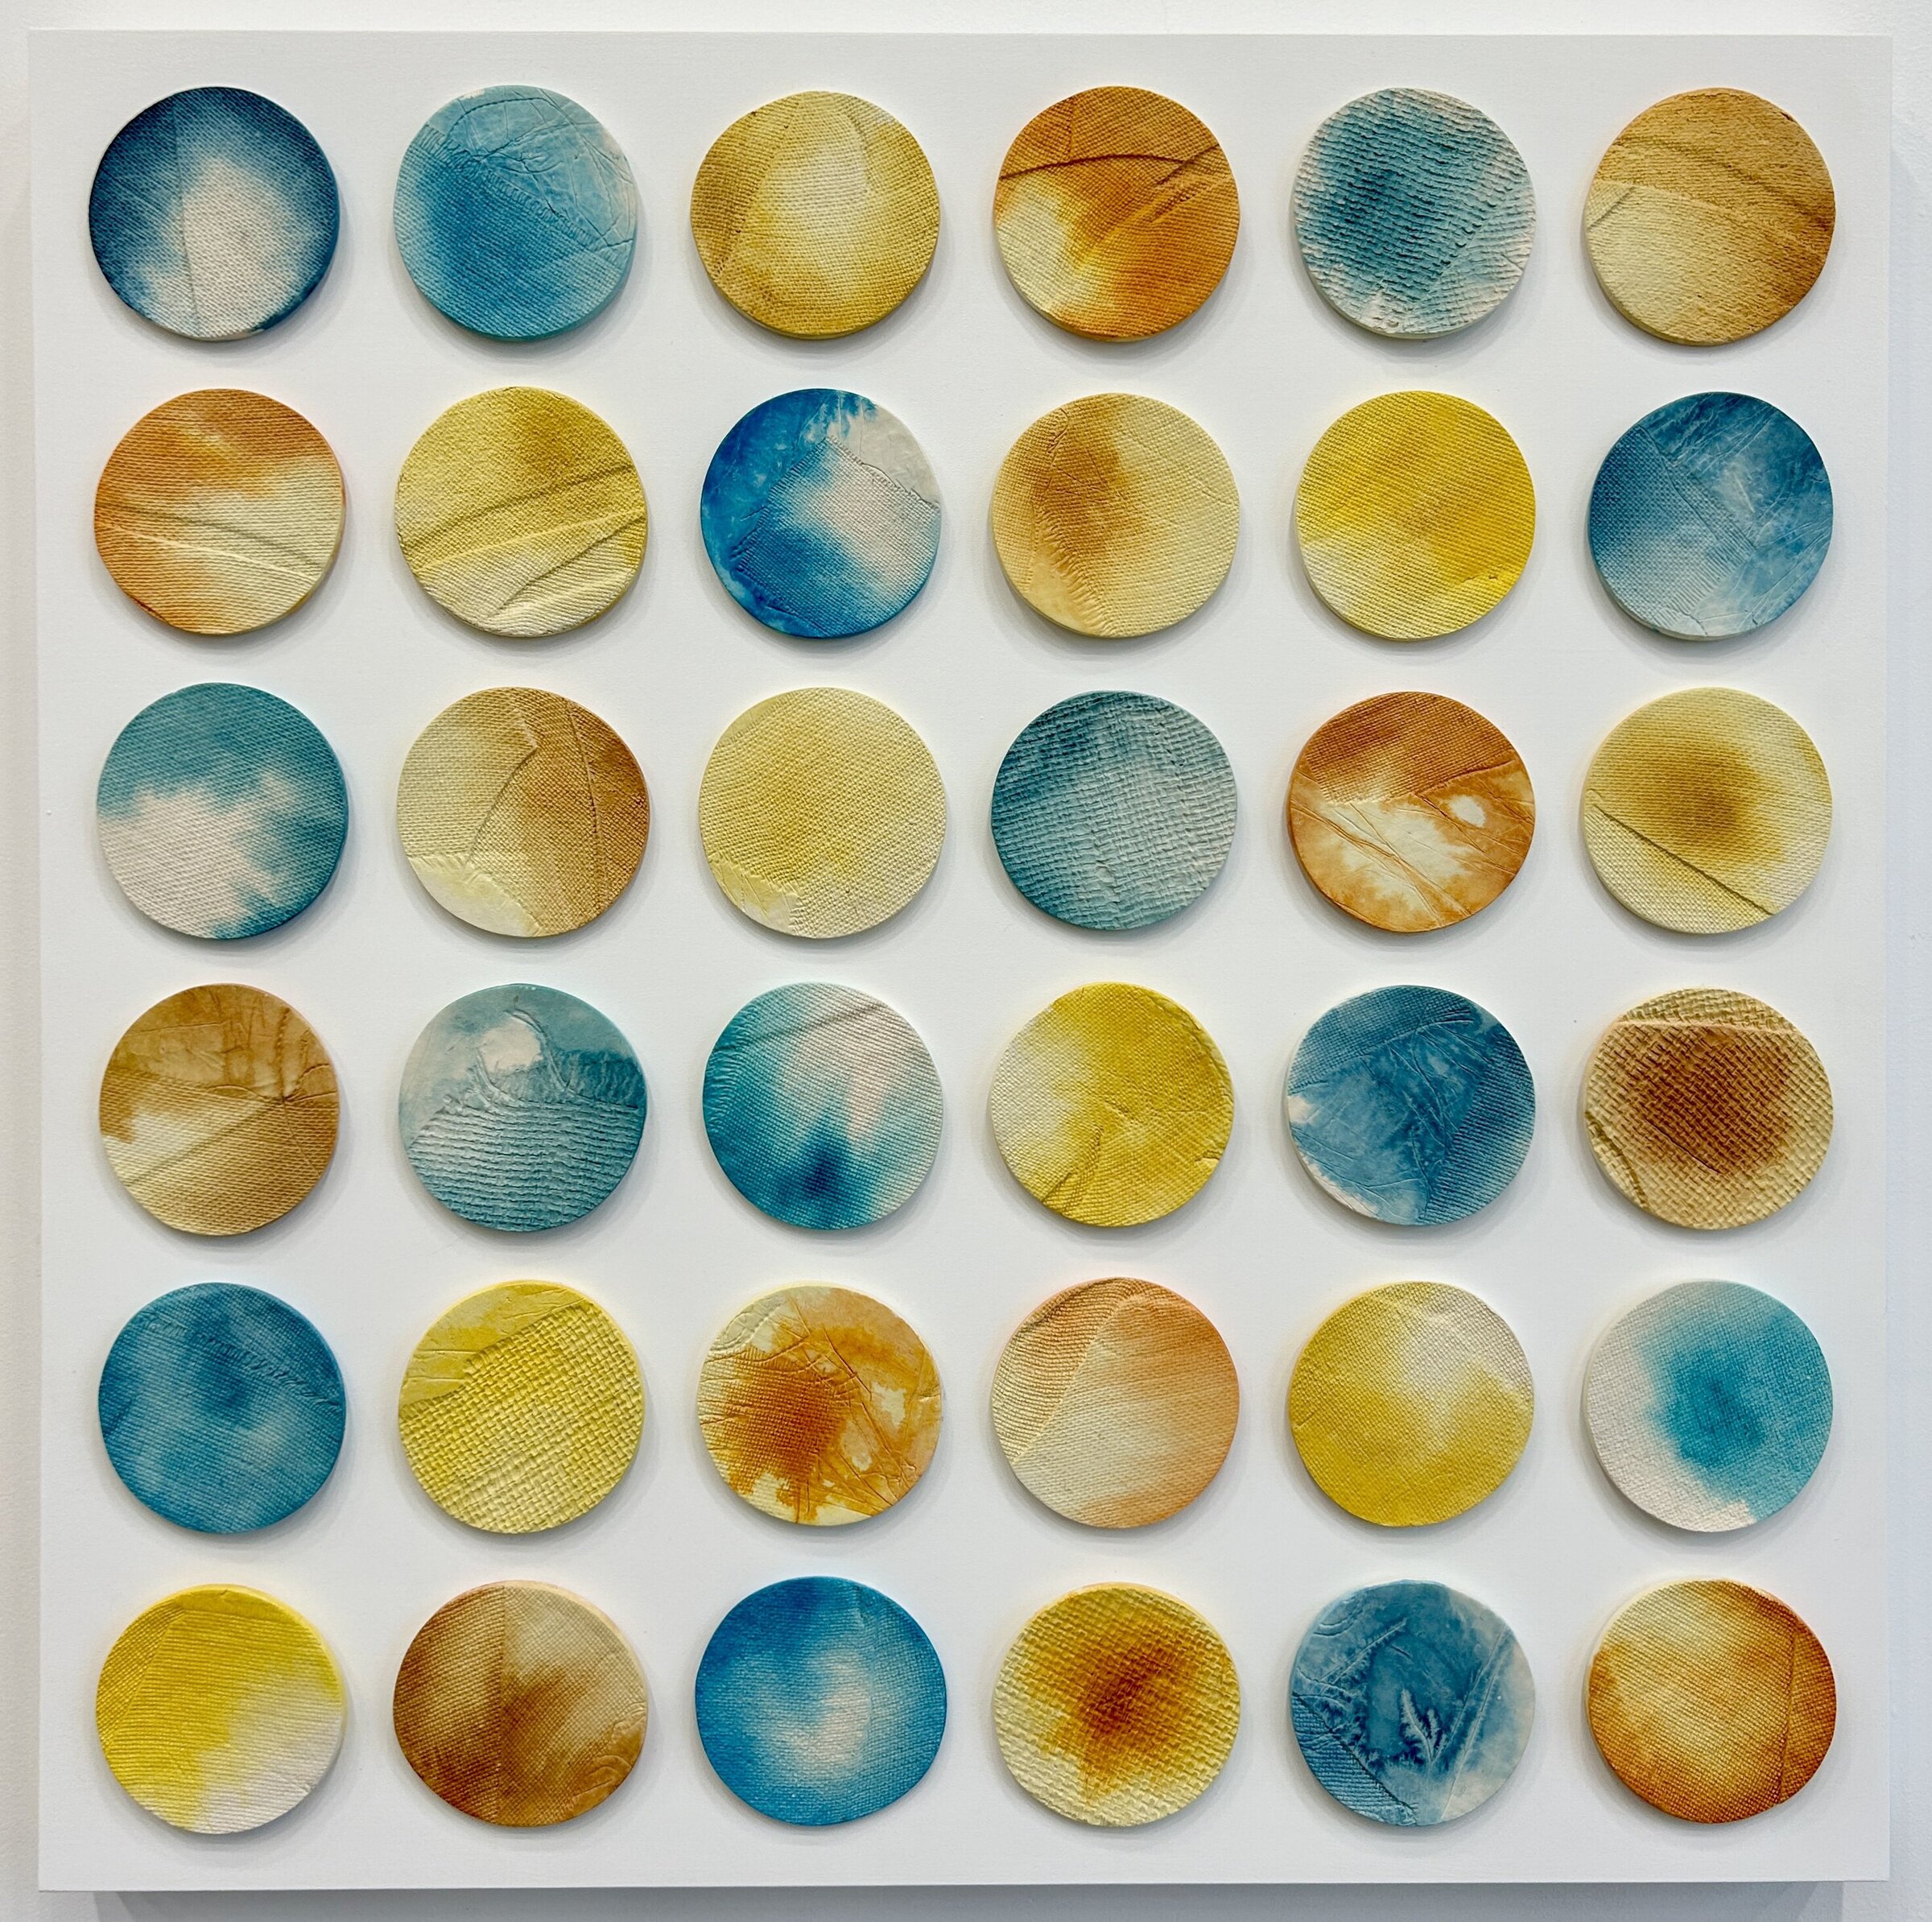 Emily Mann, Ink and Indigo, customizable dimensional wall artwork, paperclay disks with watercolor, 36x36-1 (1)